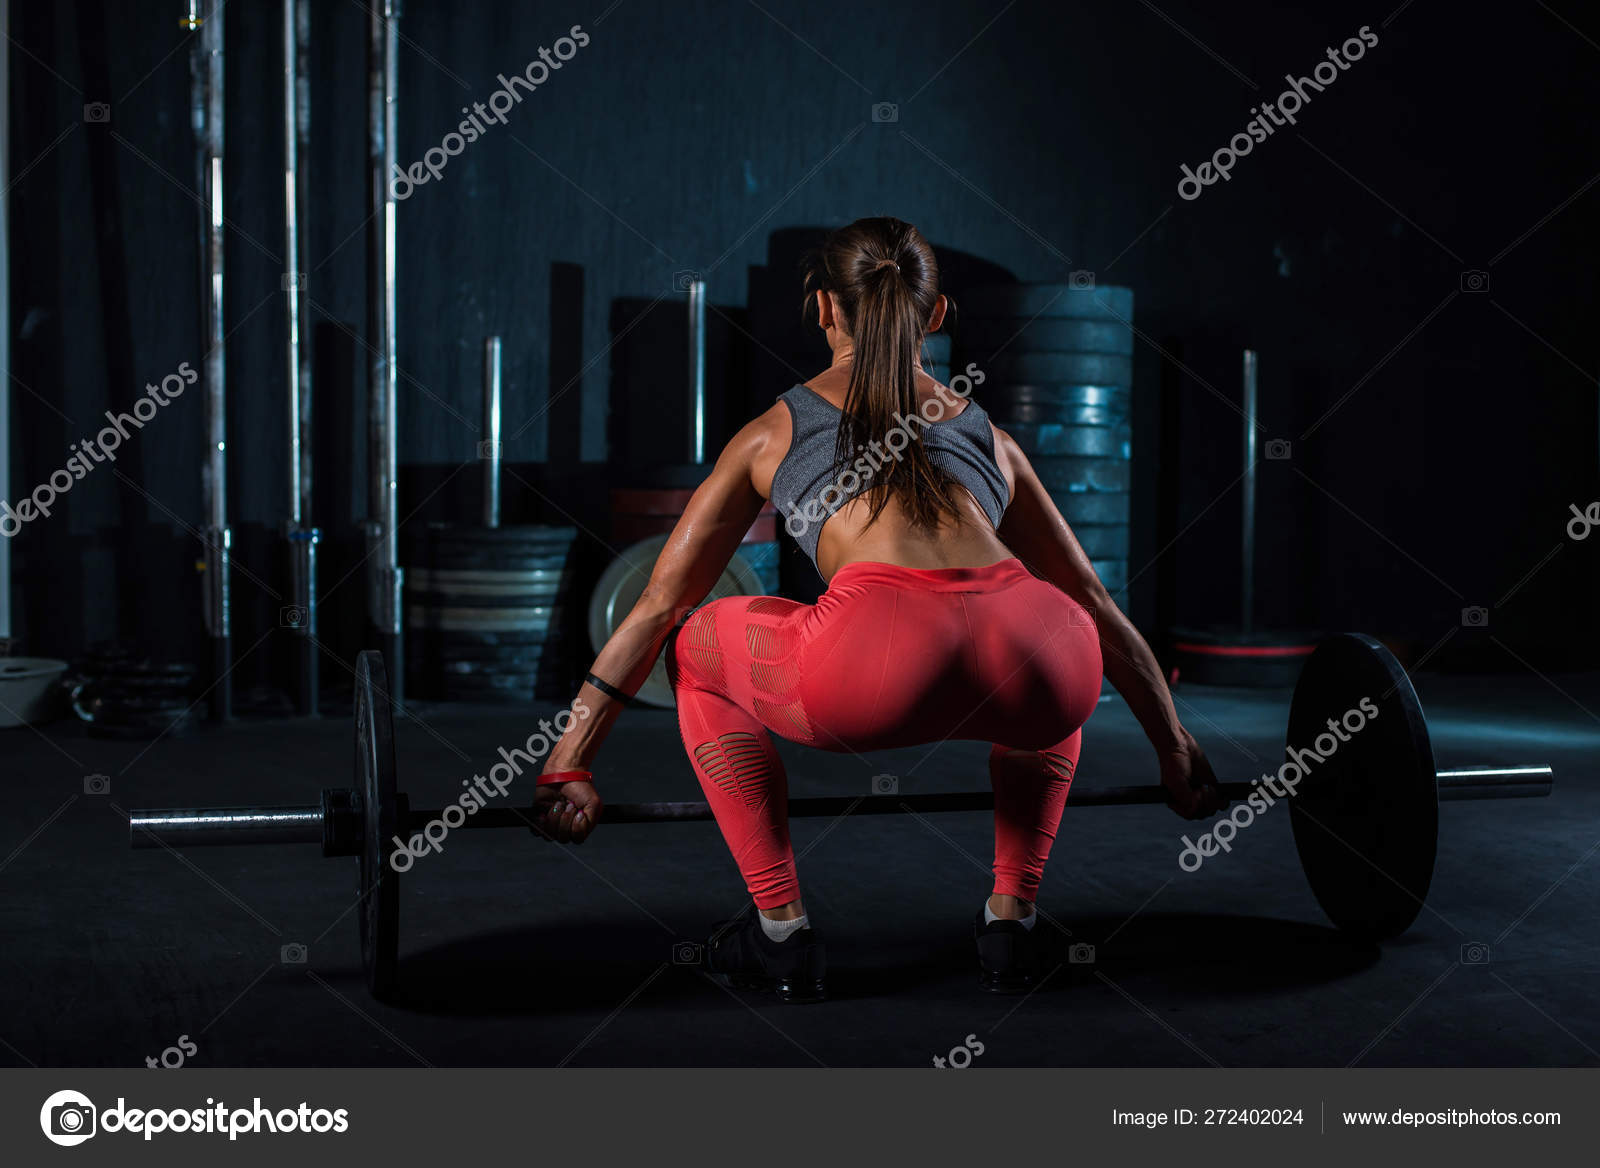 Young, European, muscular girl in red leggings, doing exercise